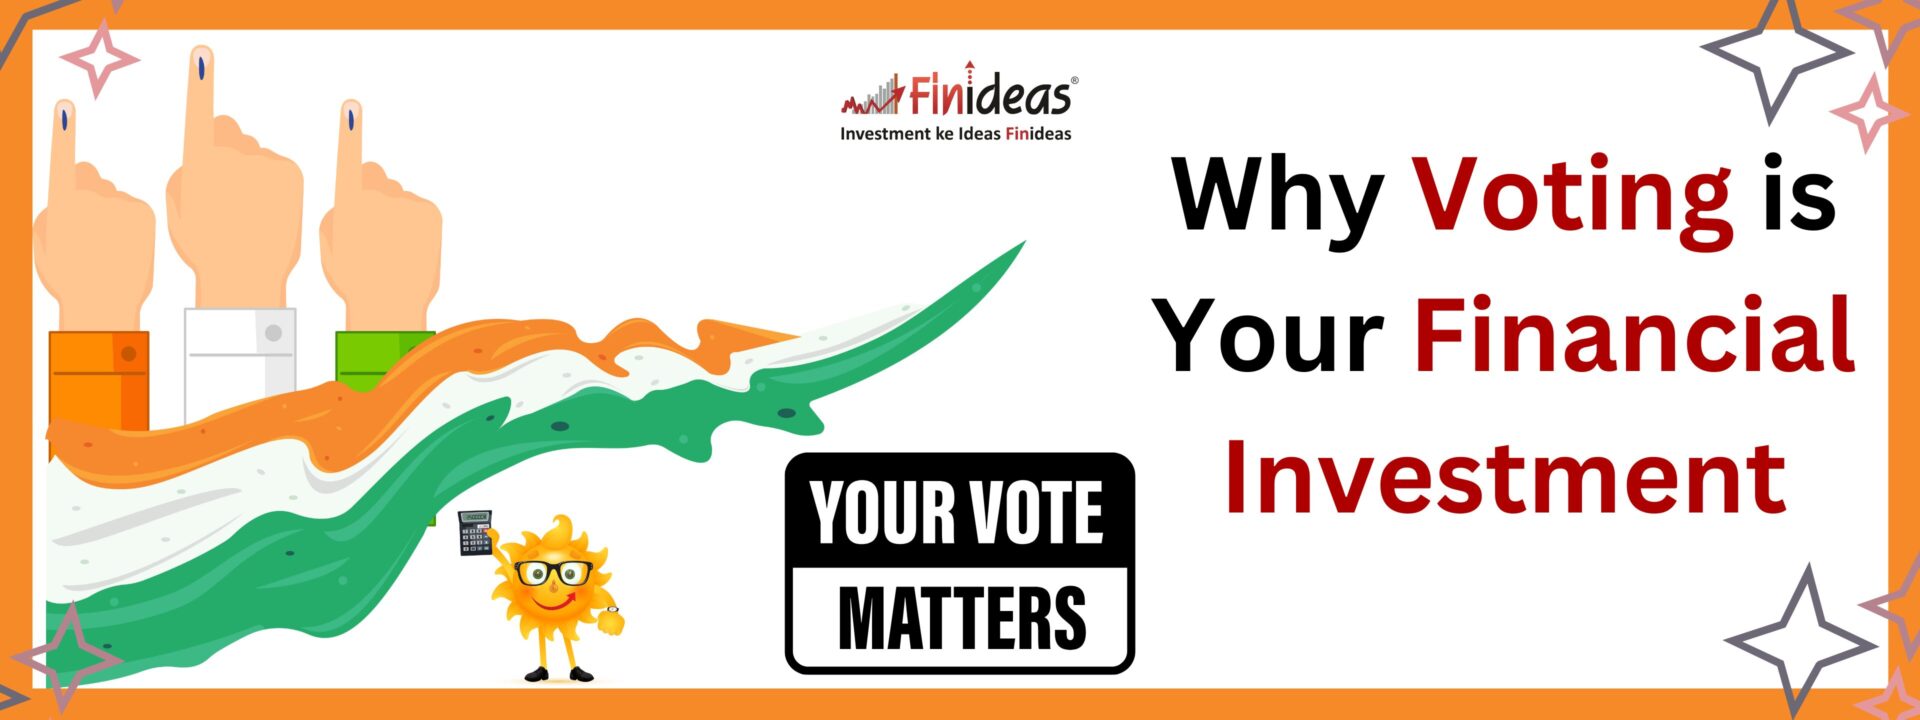 Why Voting is Your Financial Investment